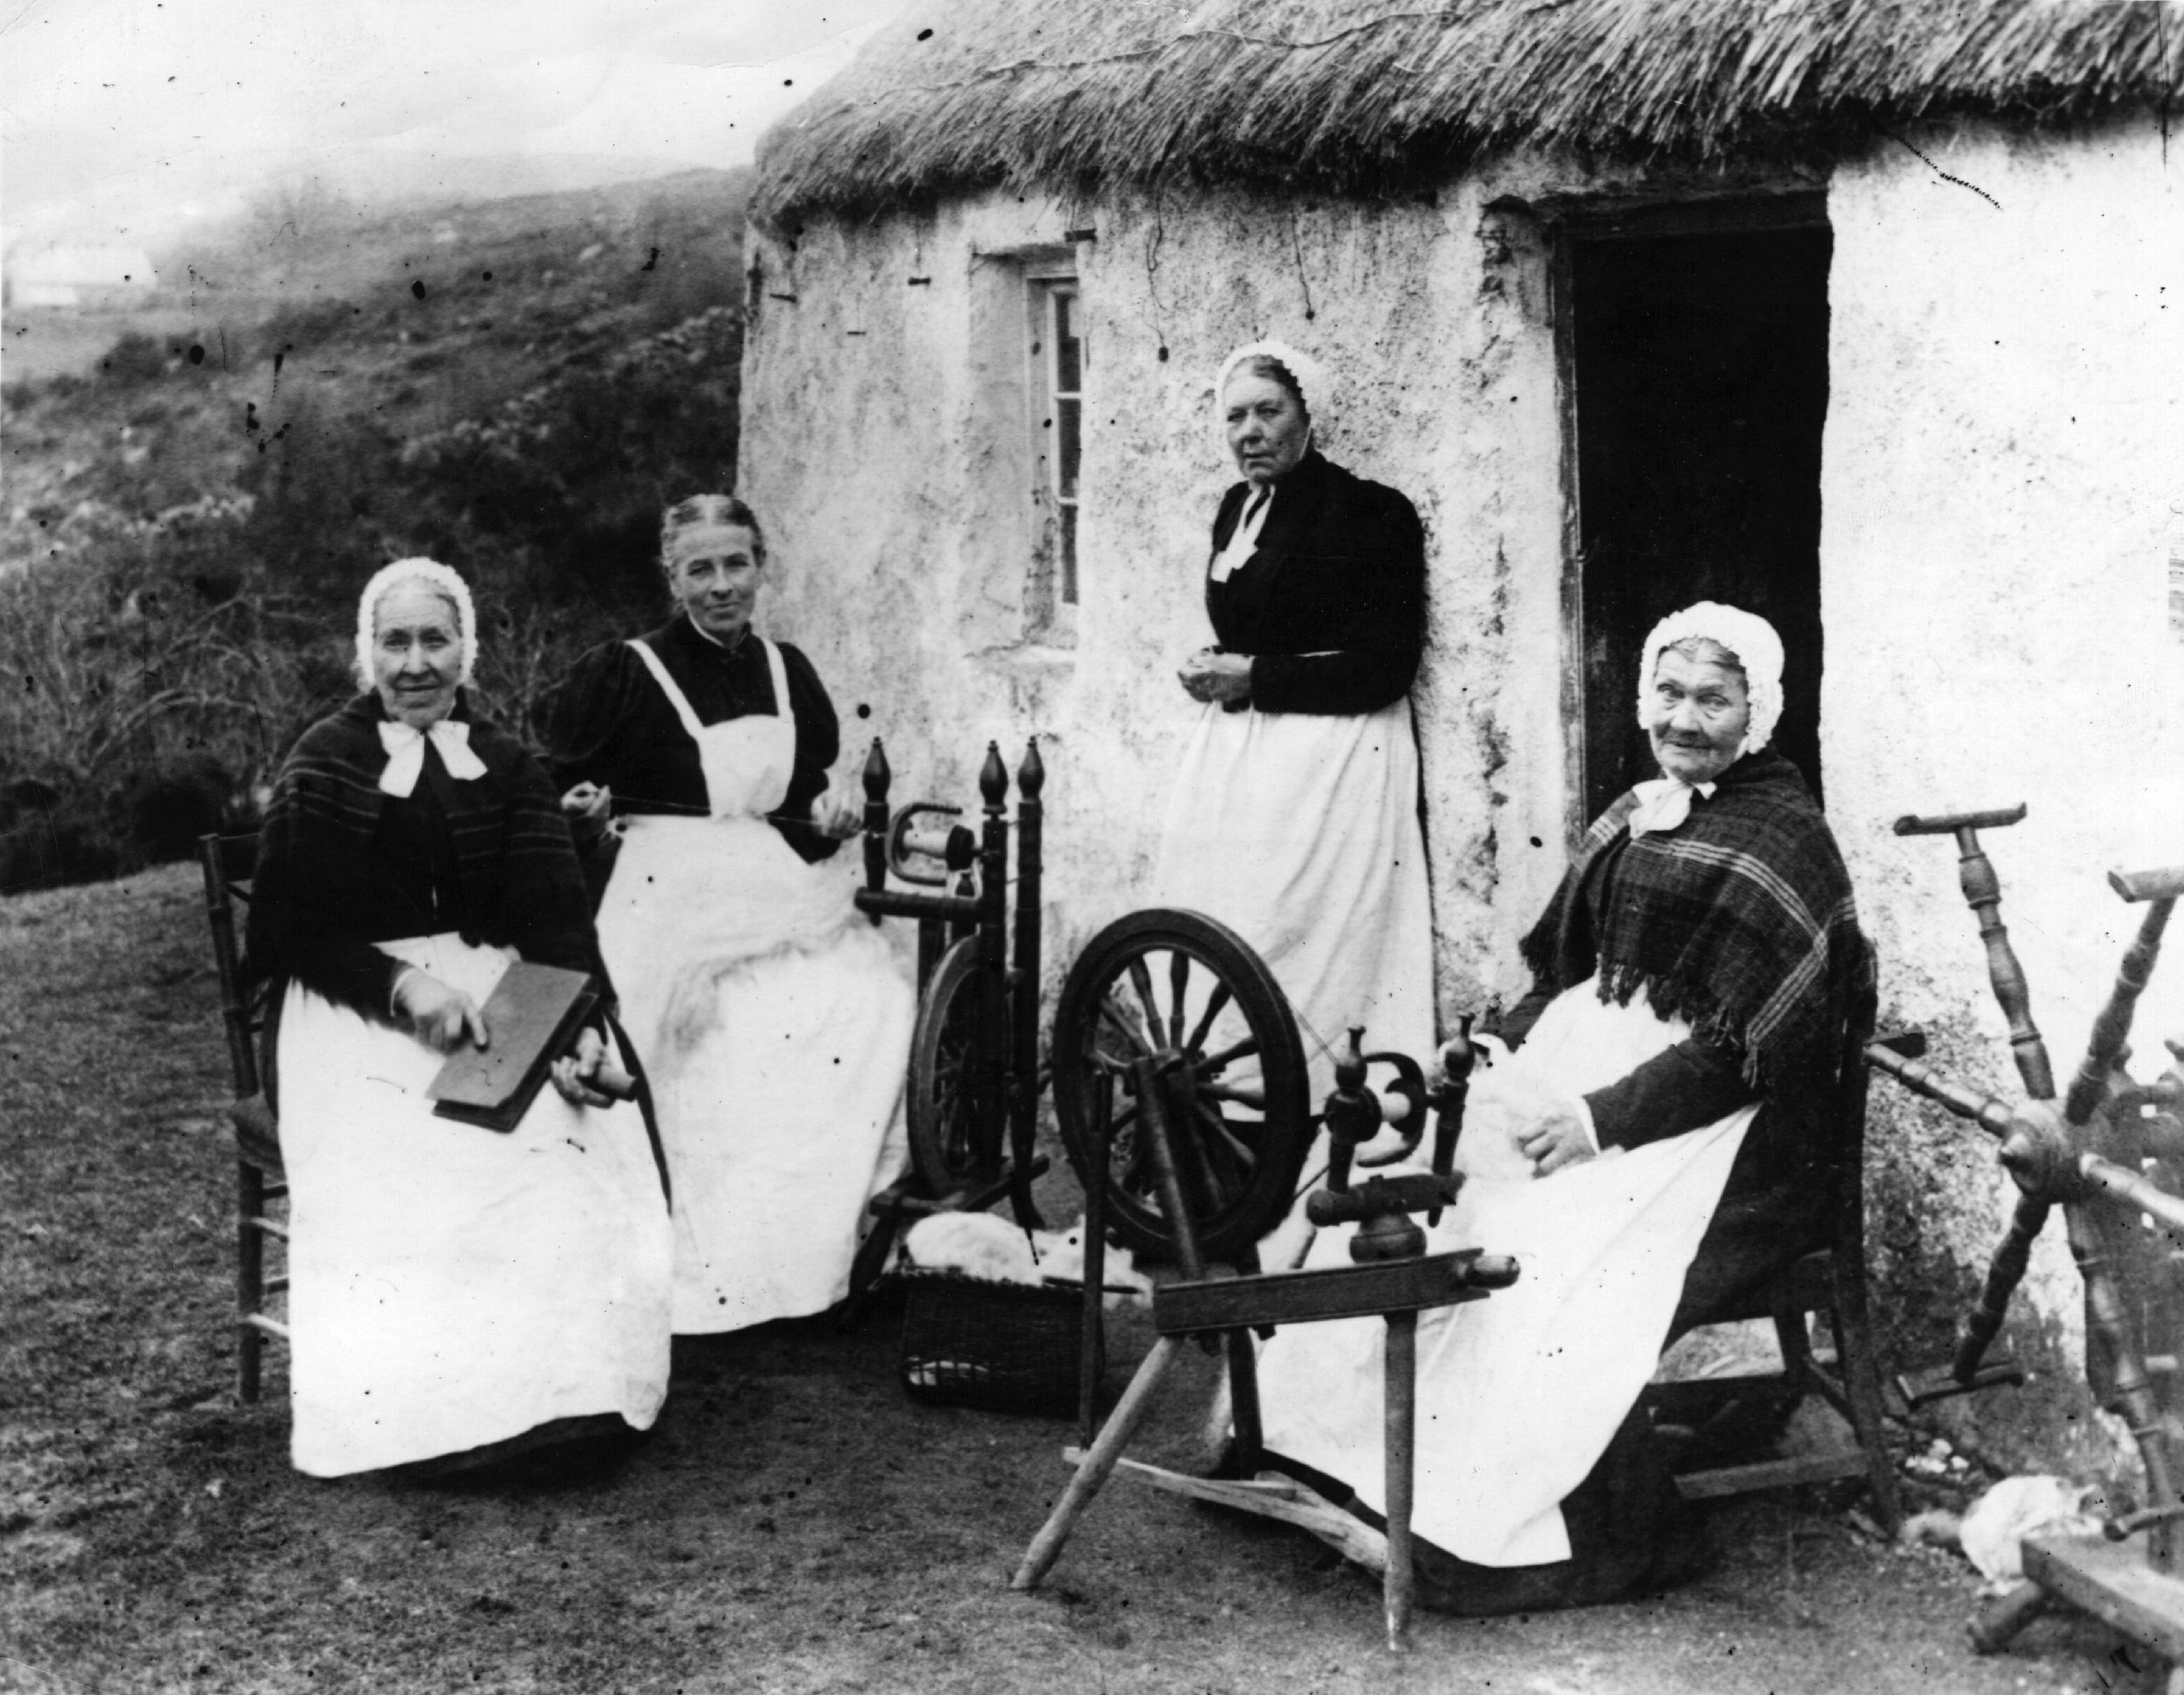 Circa 1909:  Scottish crofting women carding and spinning wool with their spinning wheels in the Highlands.  (Photo by Topical Press Agency/Getty Images)